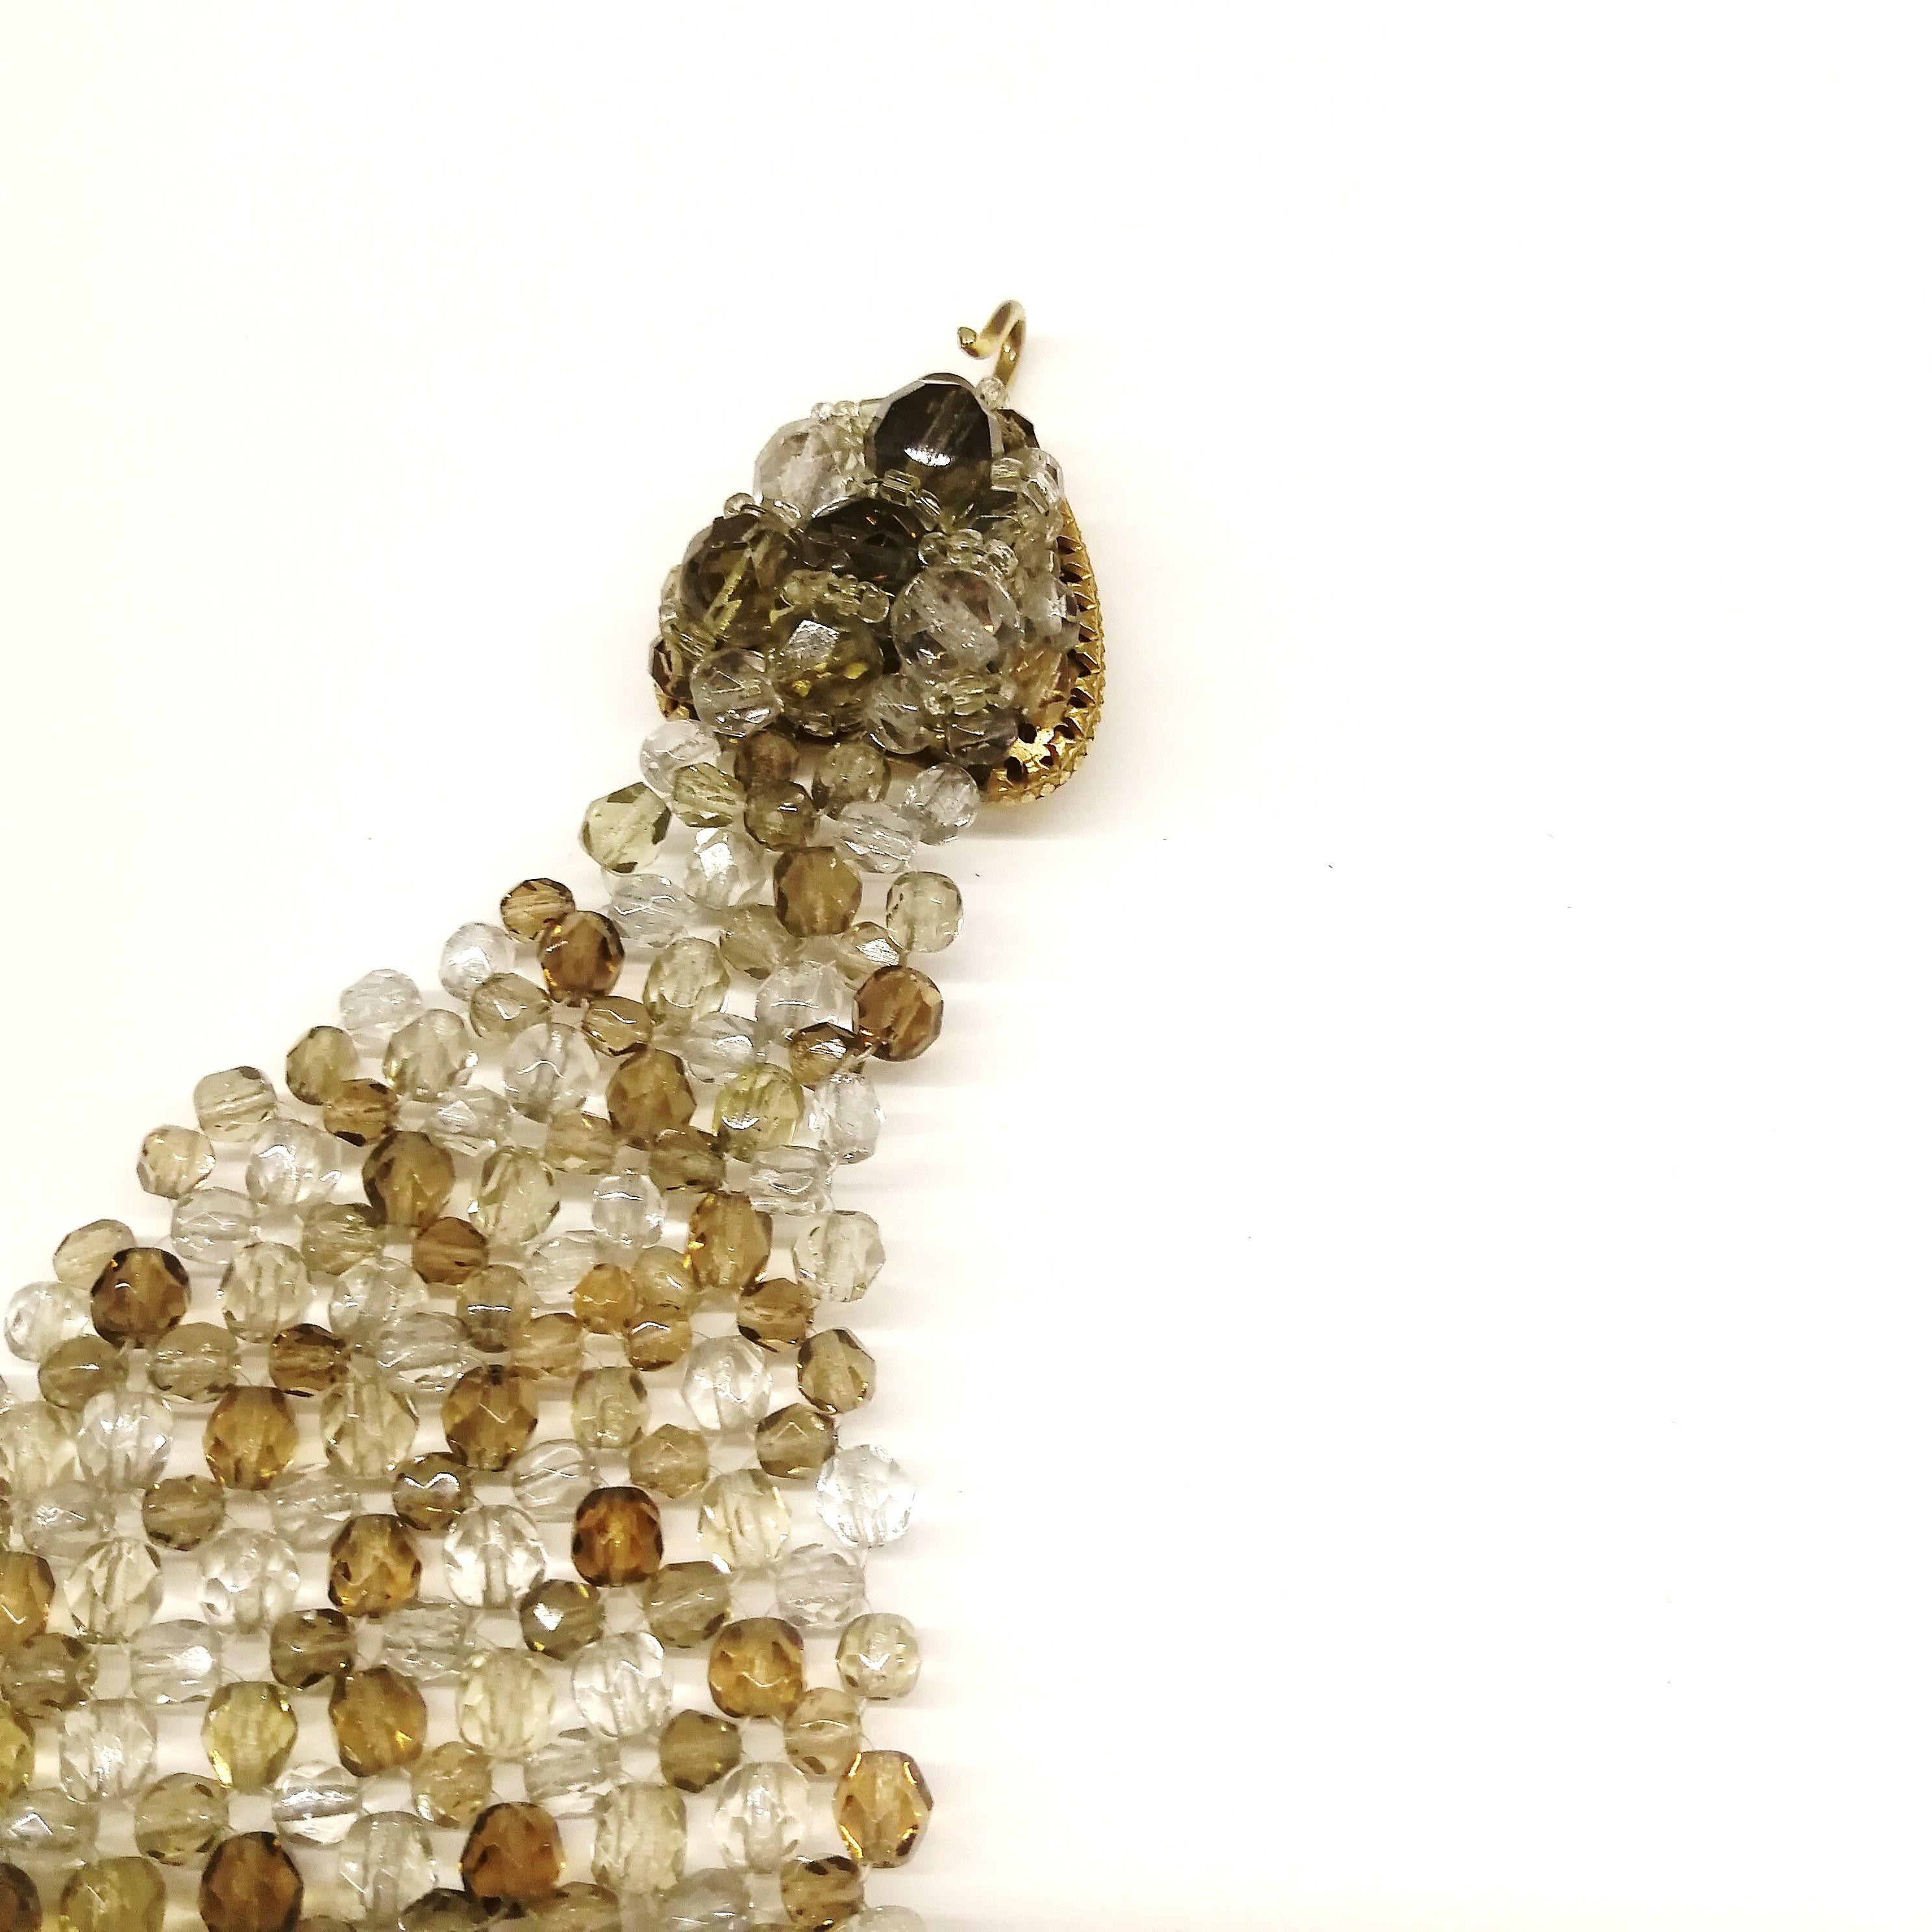 Women's Smokey quartz, taupe and clear glass bead collar, Coppola e Toppo, early 1960s.